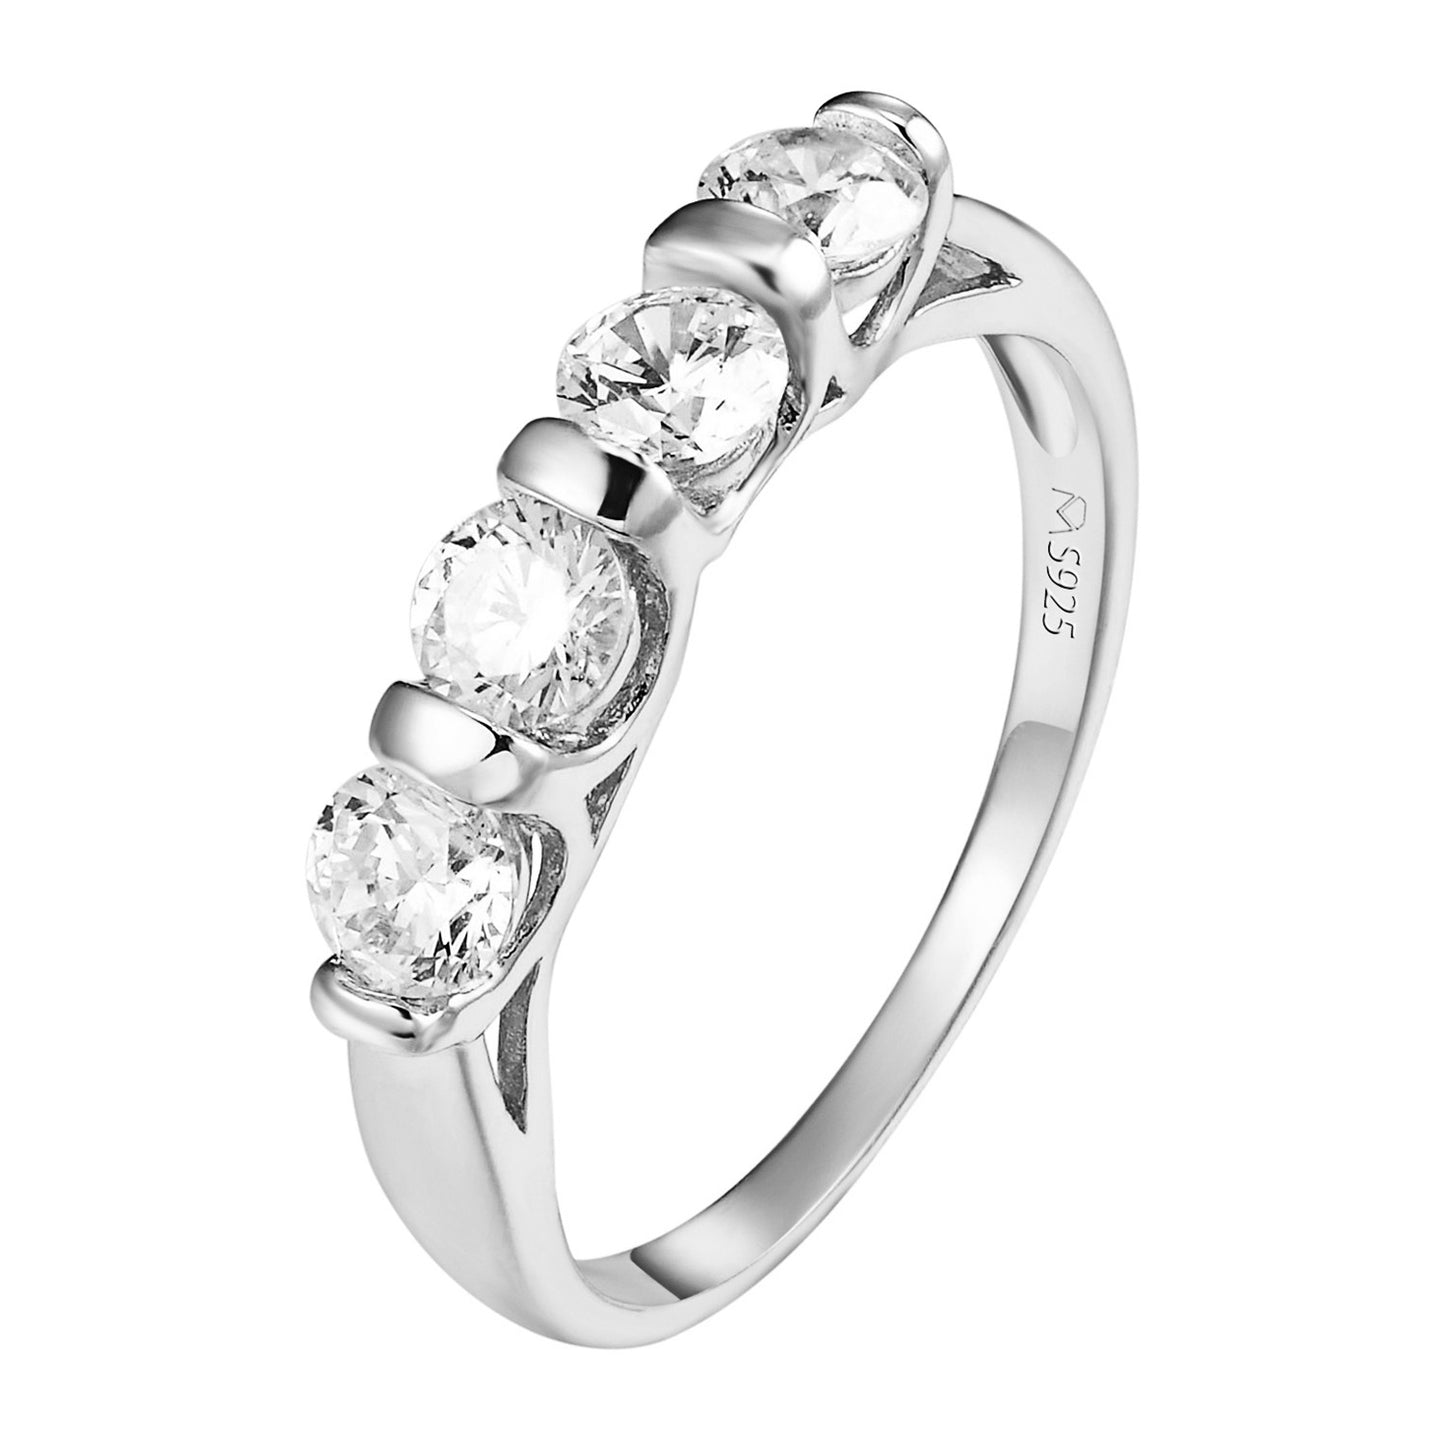 Sterling Silver Solitaire Ring Round Cut Wedding Engagement Simulated Diamond